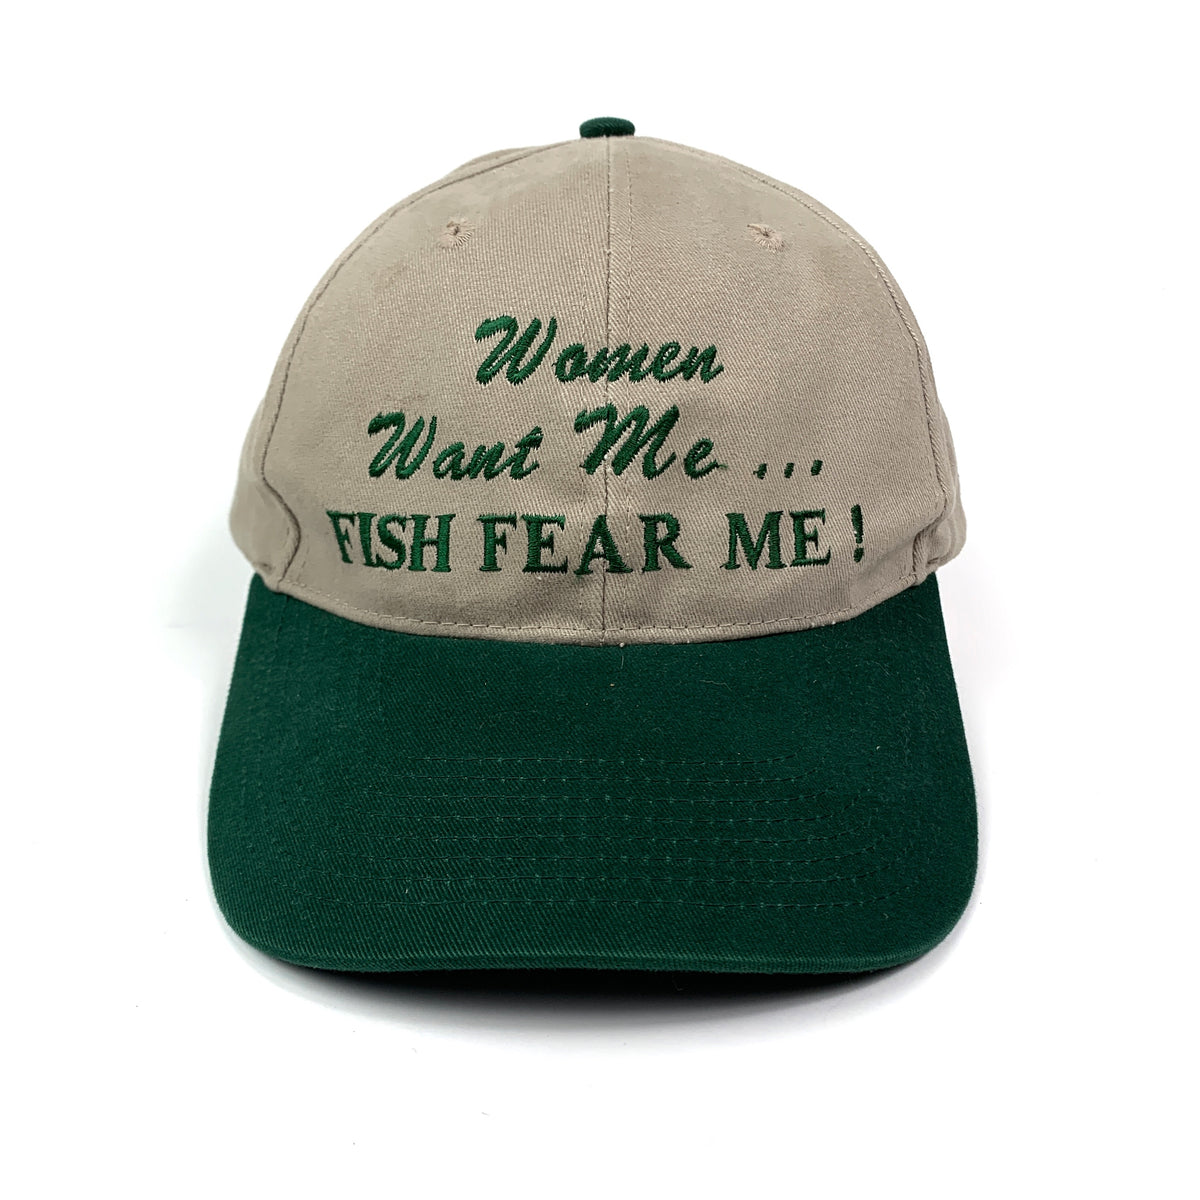 Women Want Me Fish Fear Me Hat Embroidered Stitched Snapback Baseball Hat,  Gift Under 20 